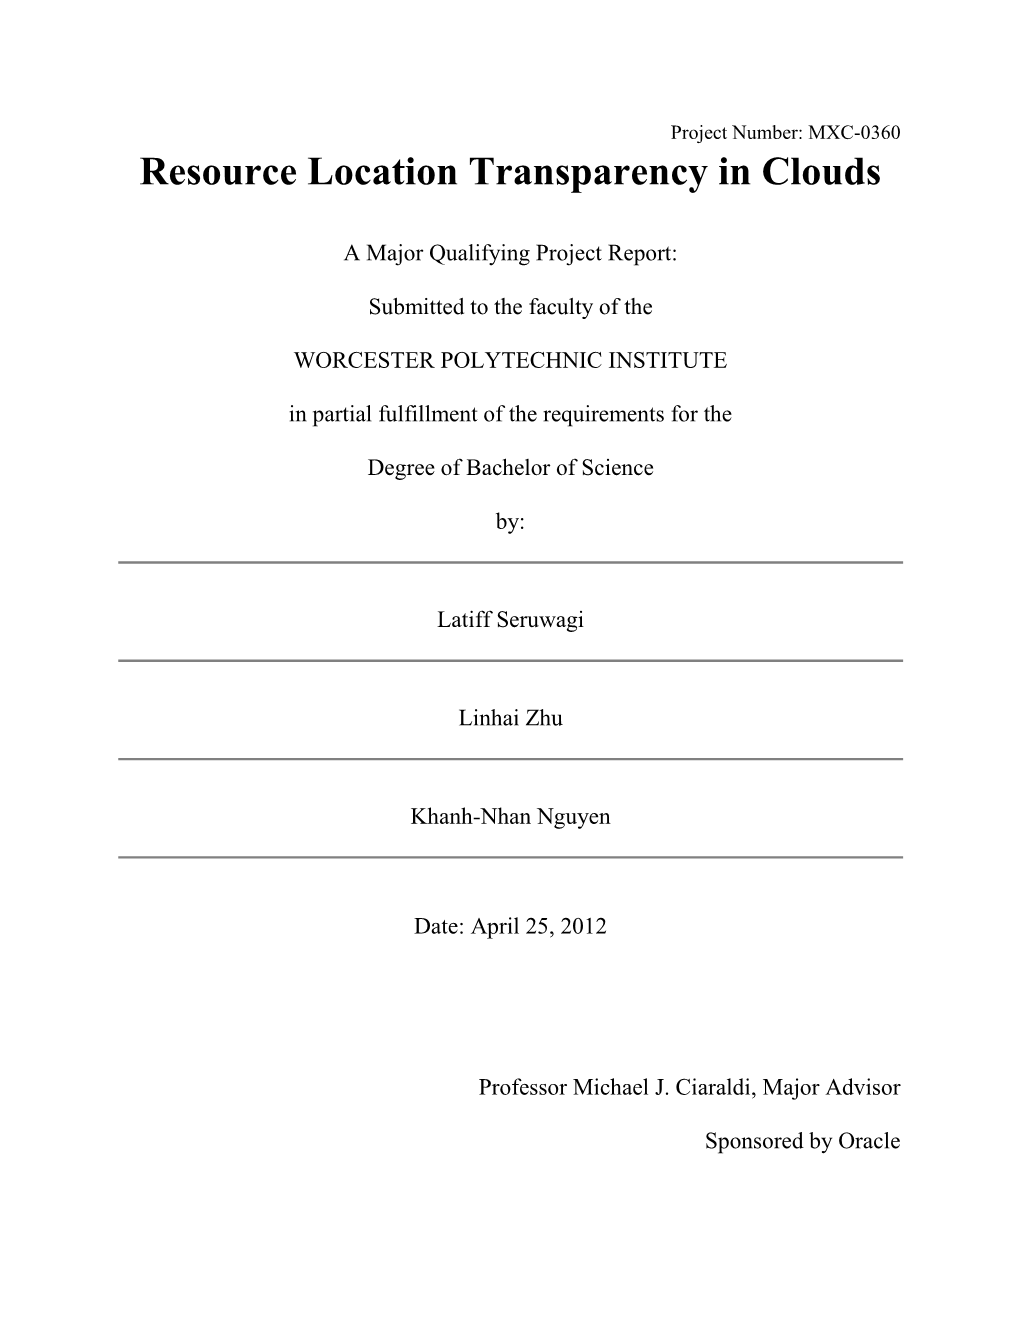 Resource Location Transparency in Clouds